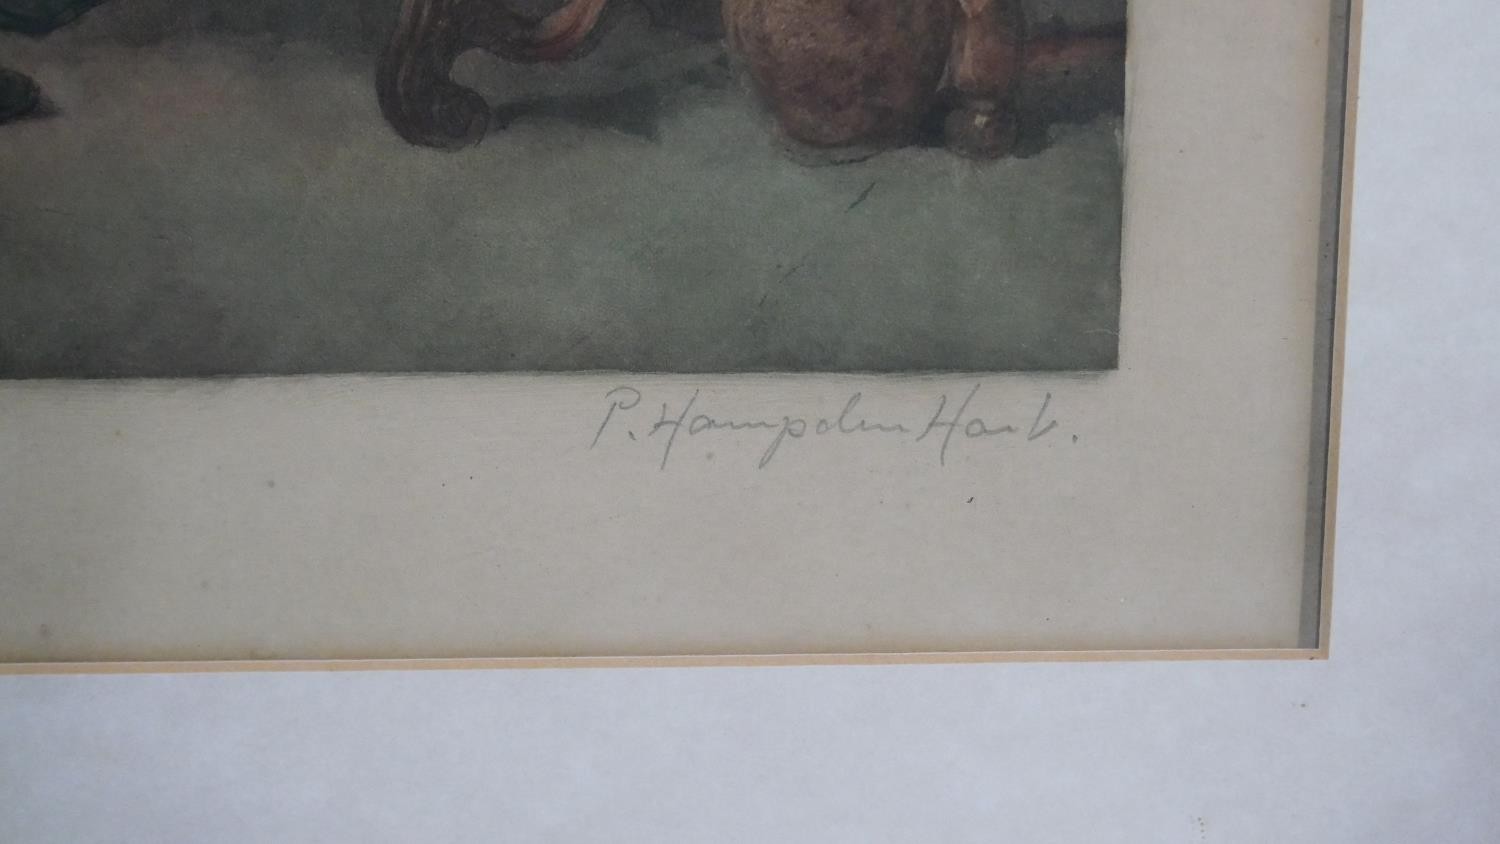 P Hampden Hart, aquatints of four famous paintings, with impressed water mark and signed. H.56 W. - Image 14 of 20